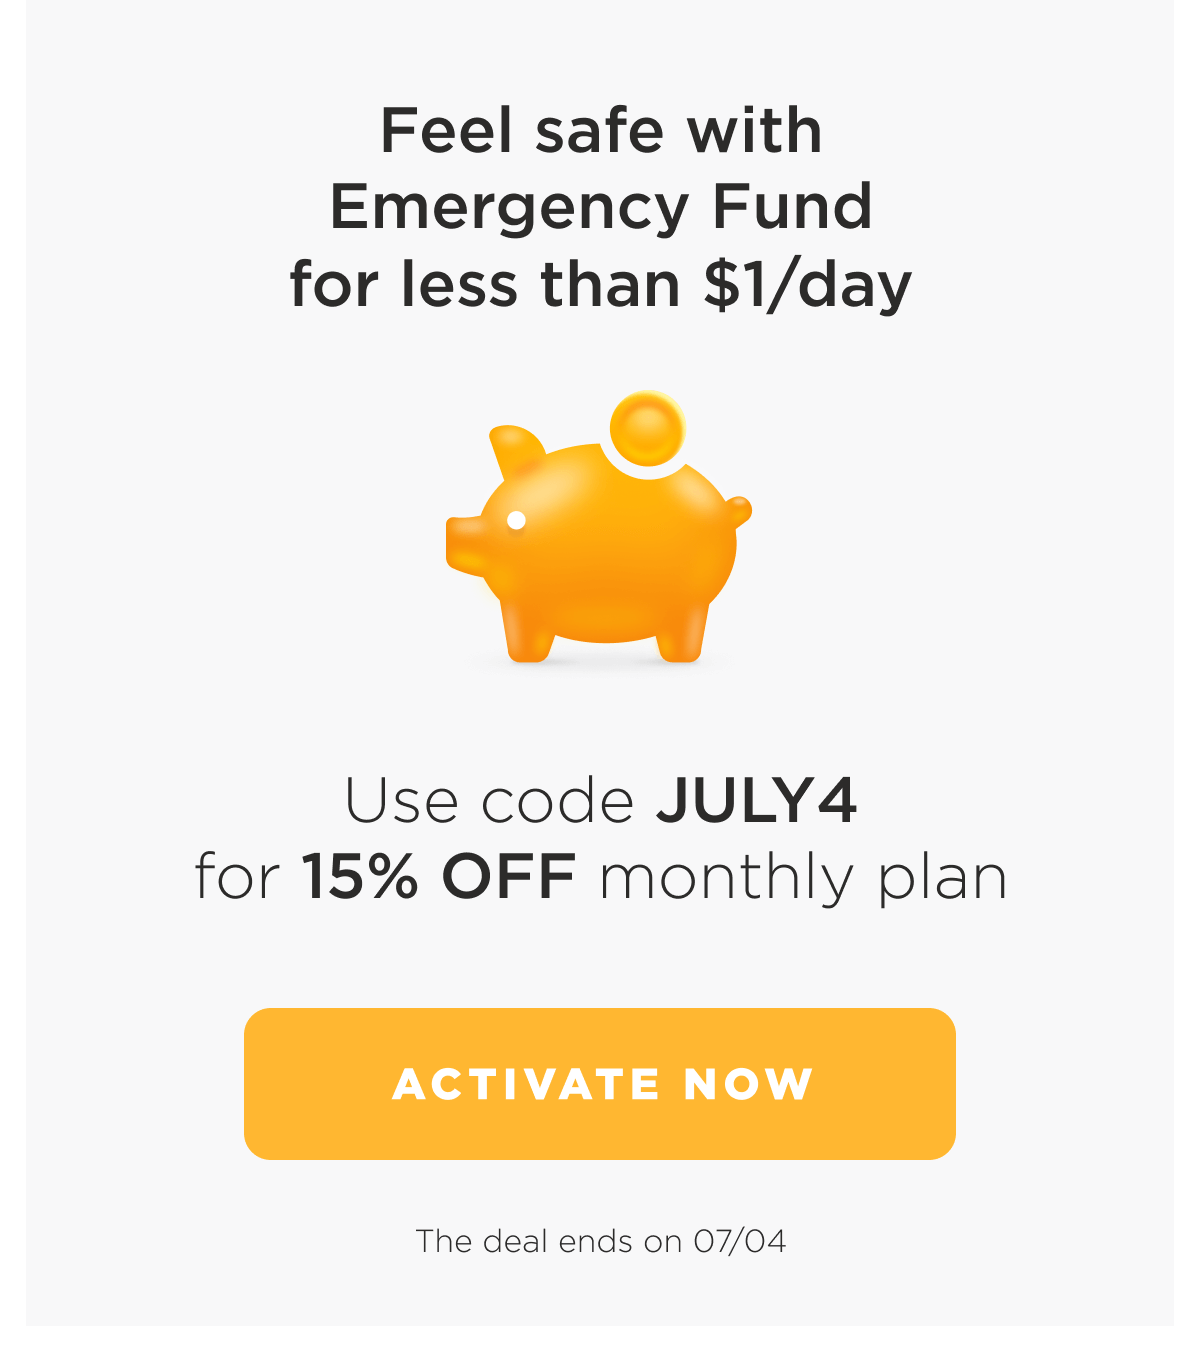 4th of July sale - 15% off Emergency Fund monthly plan